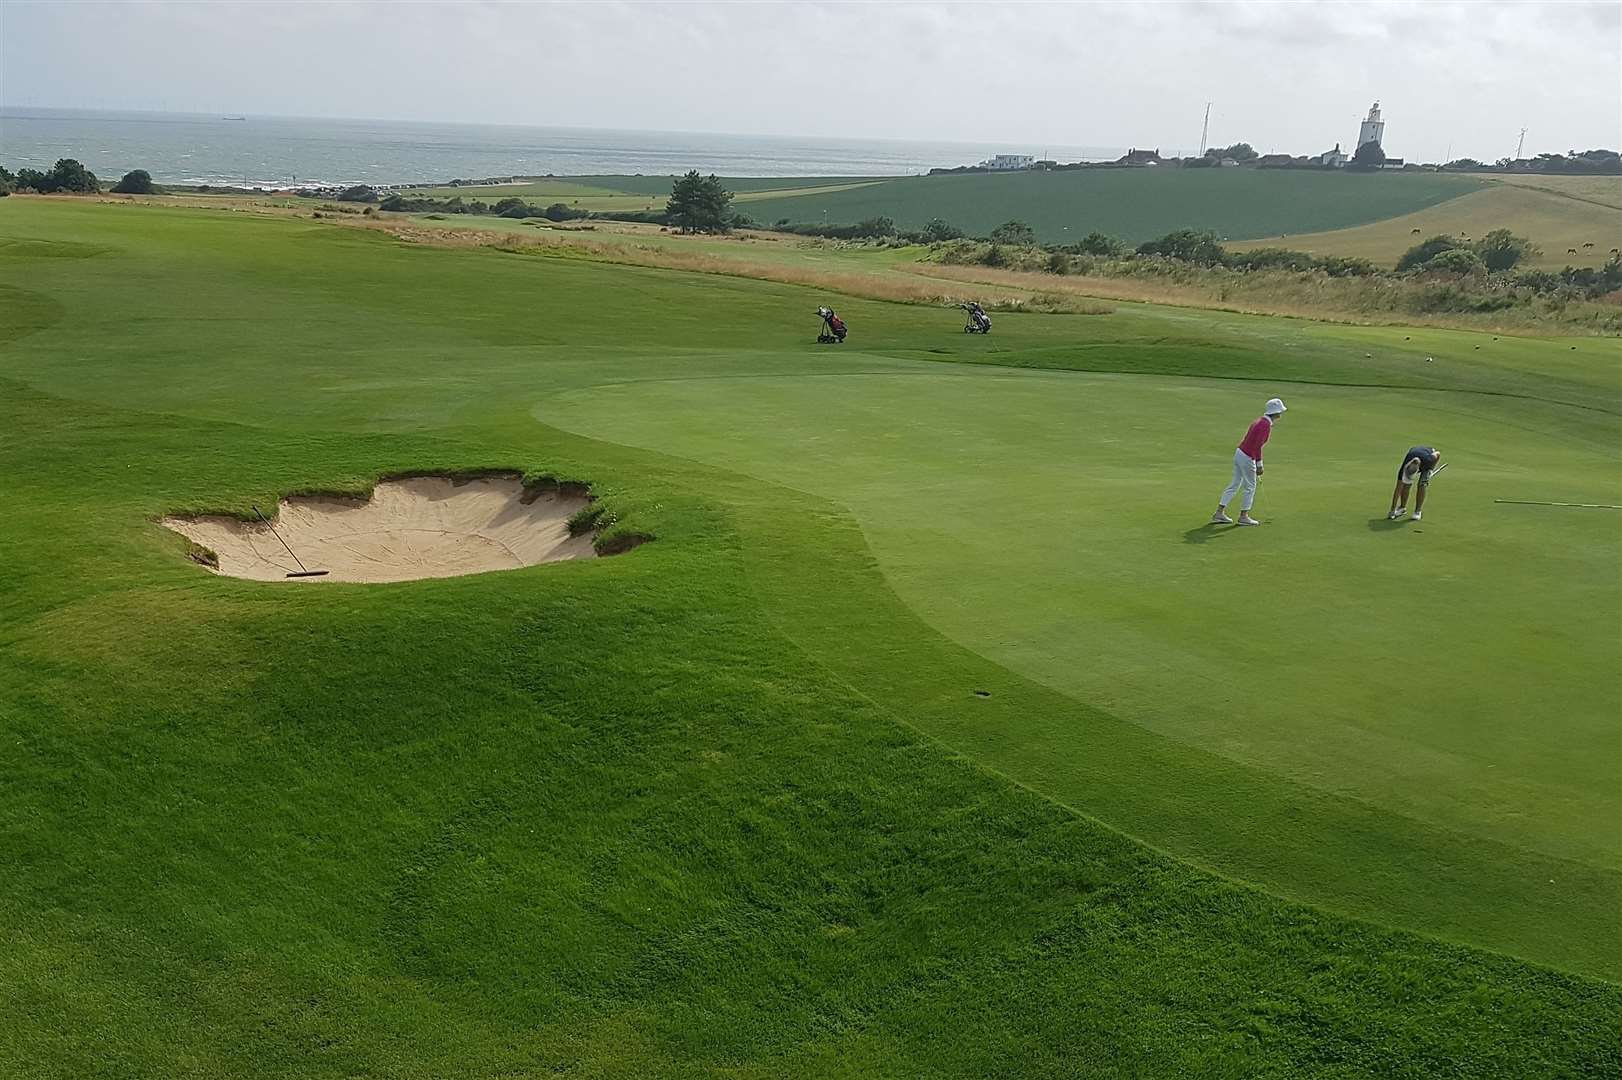 Abe Mitchell worked at North Foreland Golf Club from 1920-1925